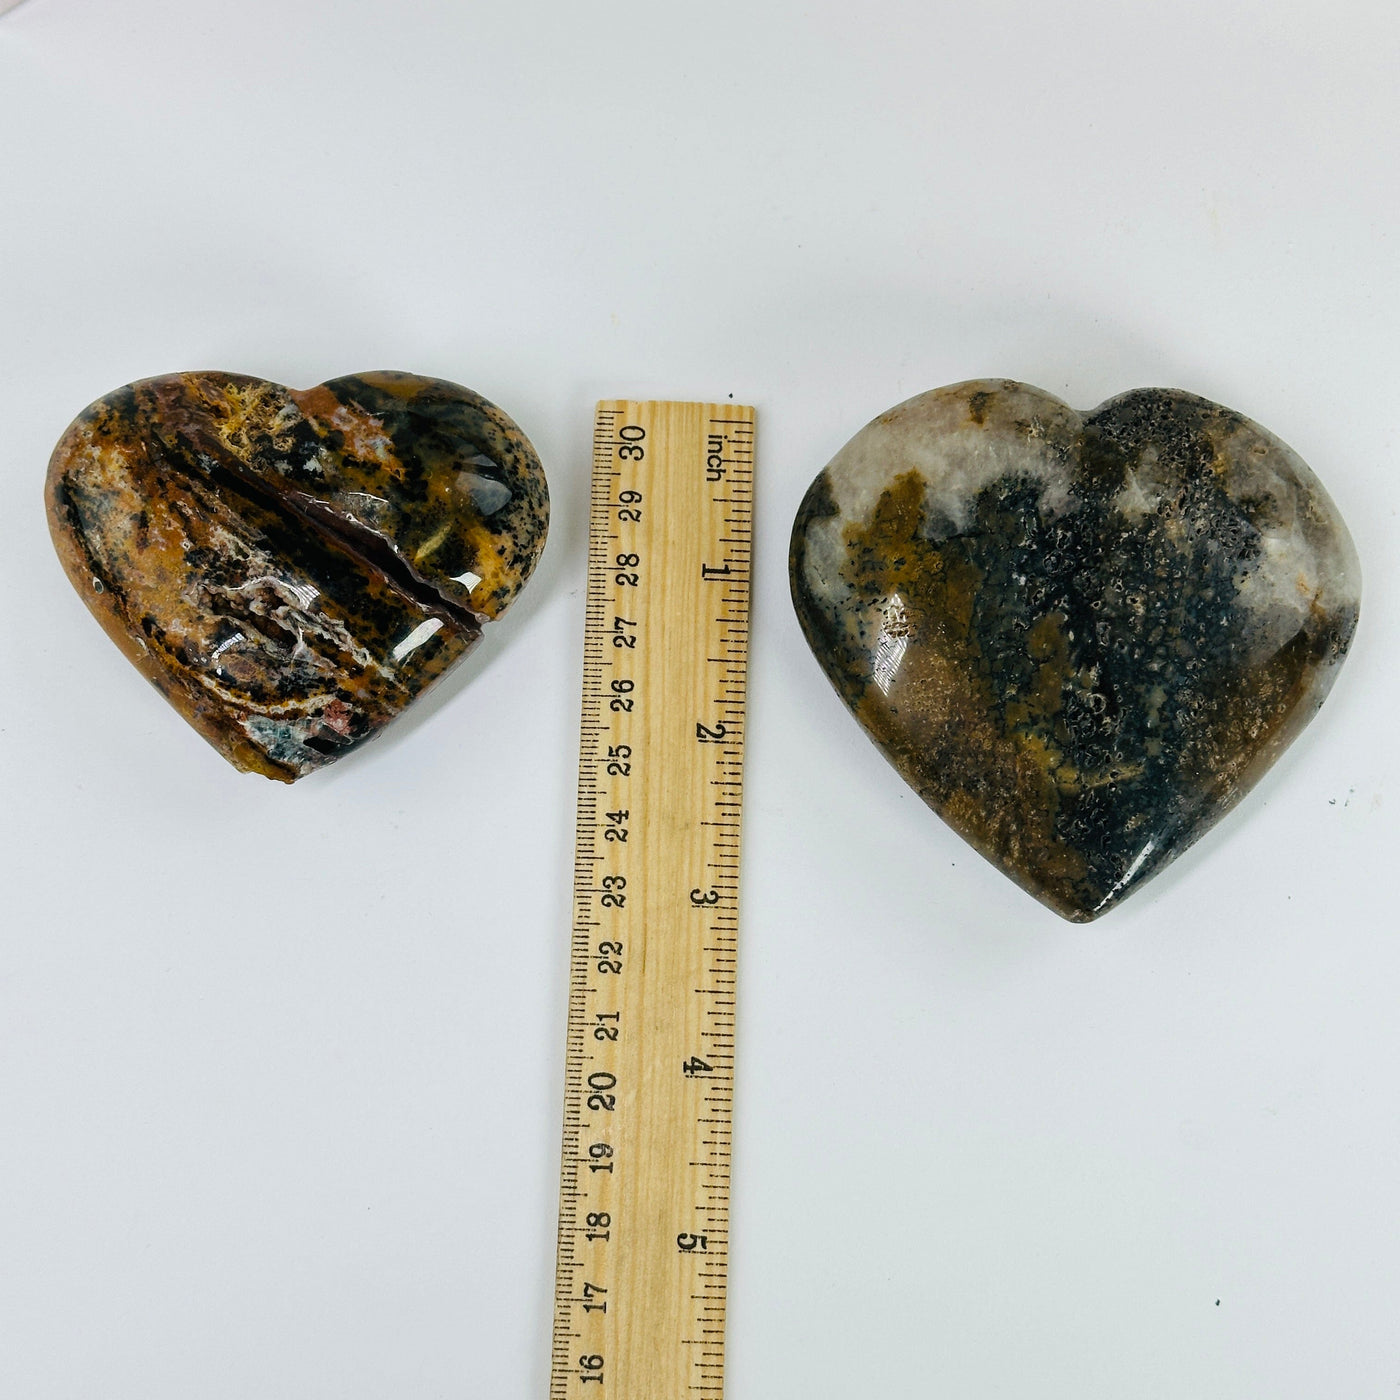 jasper heart next to a ruler for size reference